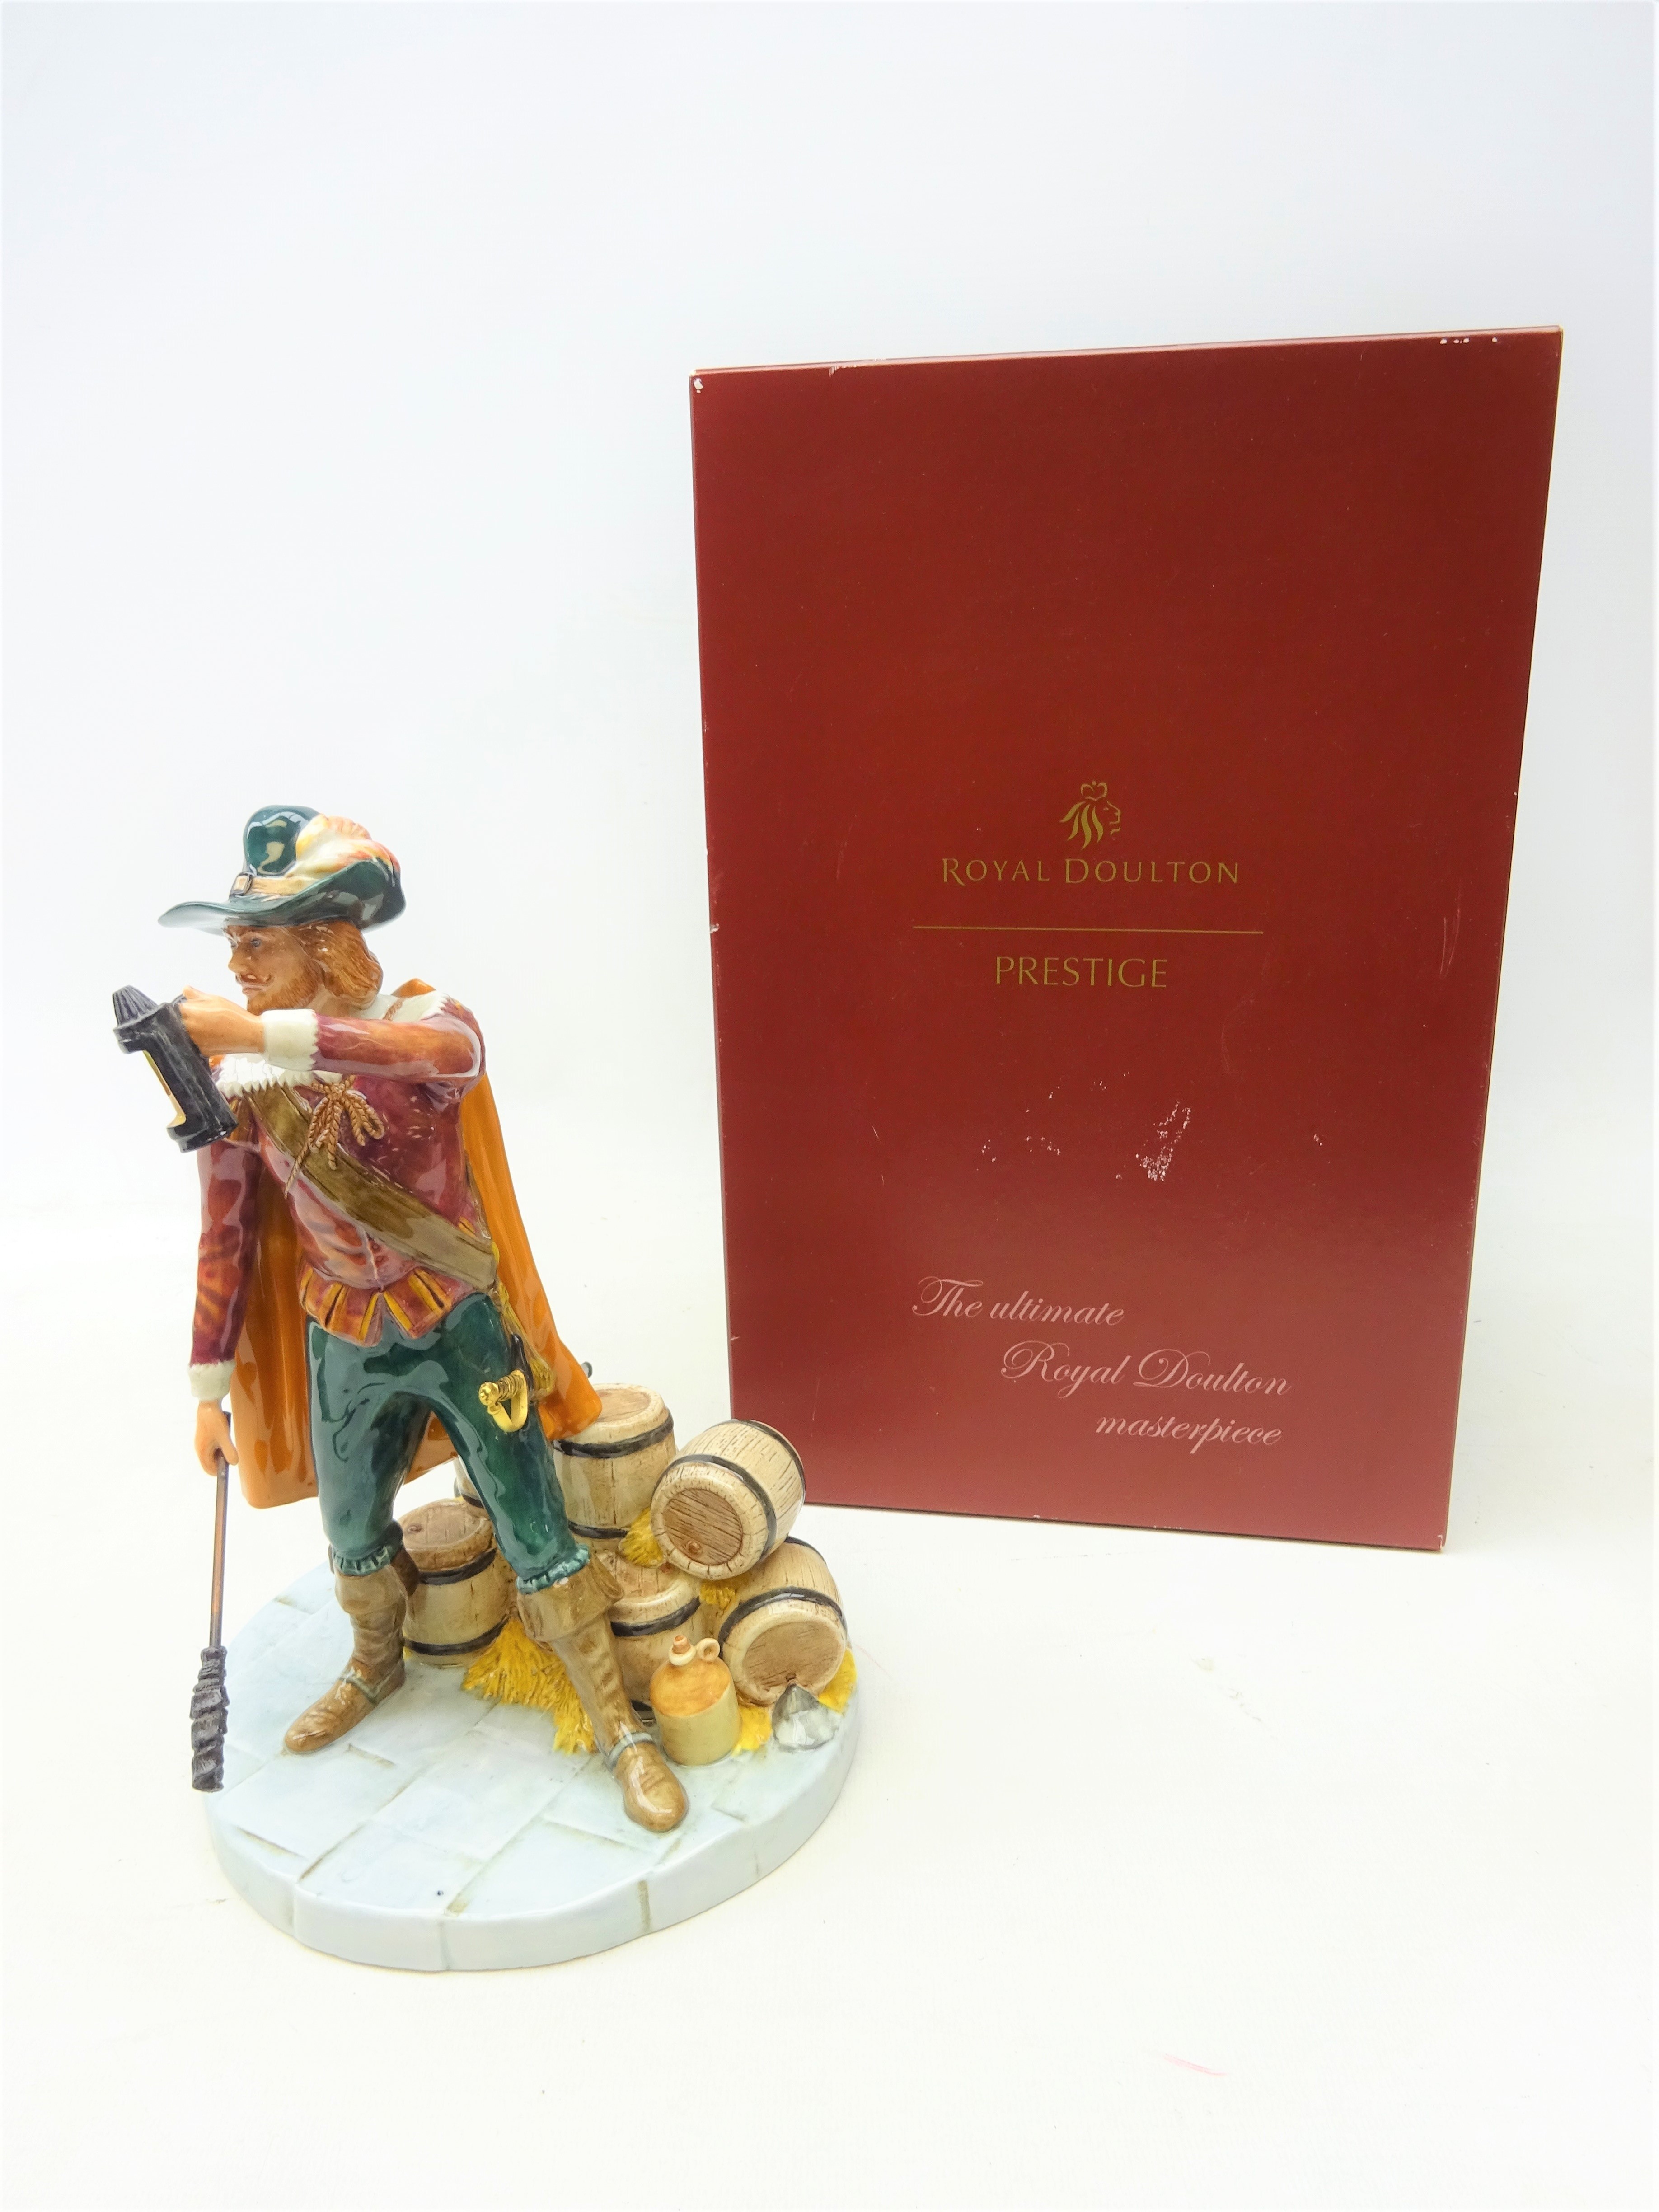 Royal Doulton Prestige limited edition figure 'Guy Fawkes' modelled by Shane Ridge HN4784 no. - Image 2 of 2